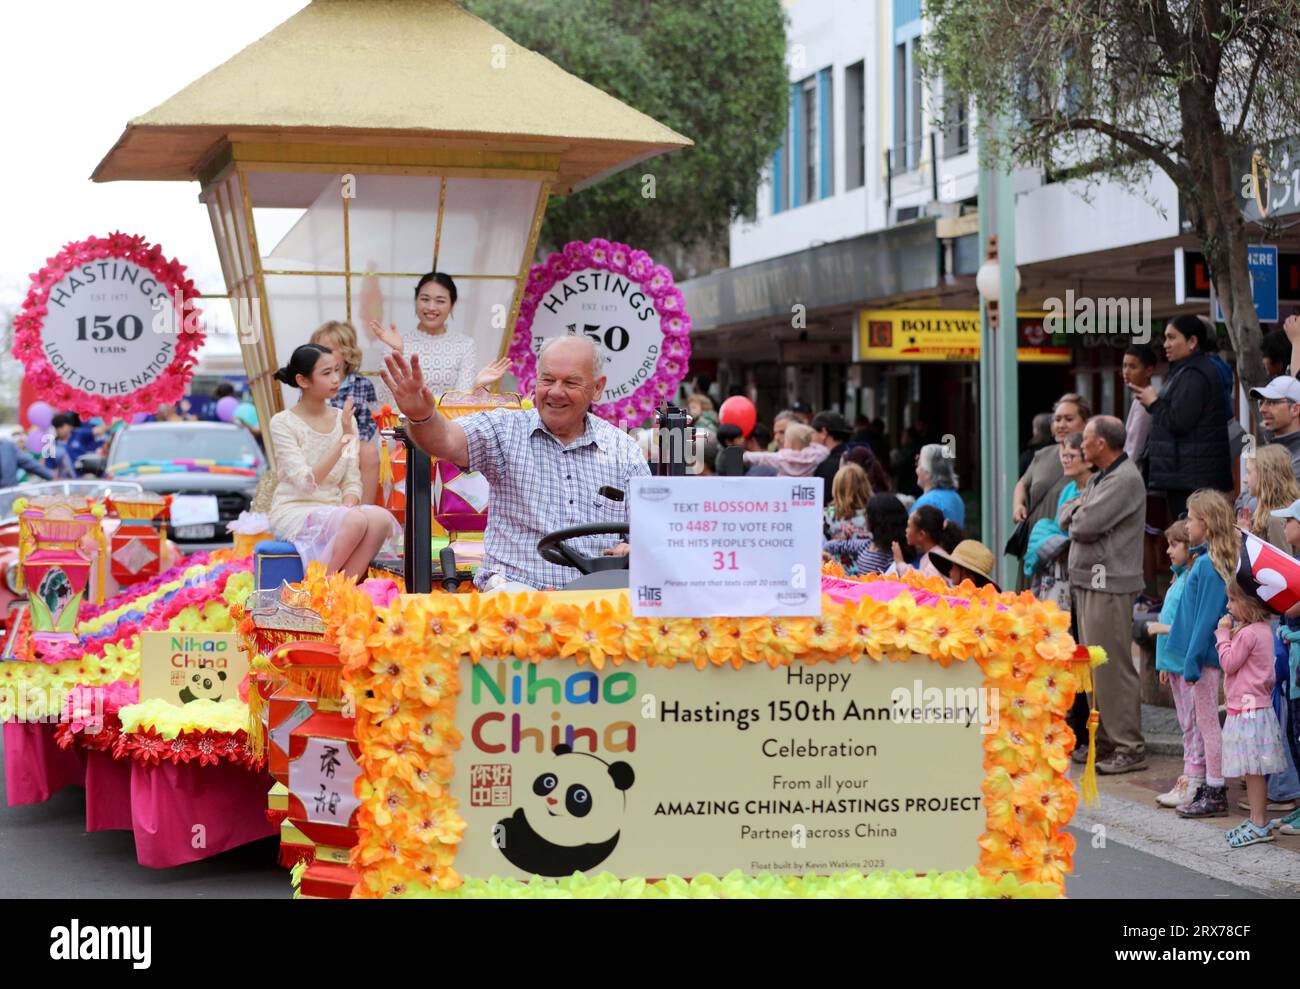 (230923) -- HASTINGS, Sept. 23, 2023 (Xinhua) -- Hastings district councilor Kevin Watkins drives a float named after Nihao China at the Hastings Blossom Parade in Hastings, New Zealand, Sept. 23, 2023. Tens of thousands of people lined up the streets in New Zealand's inner city Hastings to see the colorful floats and amazing performances for the Hastings Blossom Parade on Saturday. A total of 71 magnificent entries threaded their way through the main streets of the city, attracting a crowd of over 25,000 viewers. One of the floats was named after Nihao China, which promotes China's touri Stock Photo